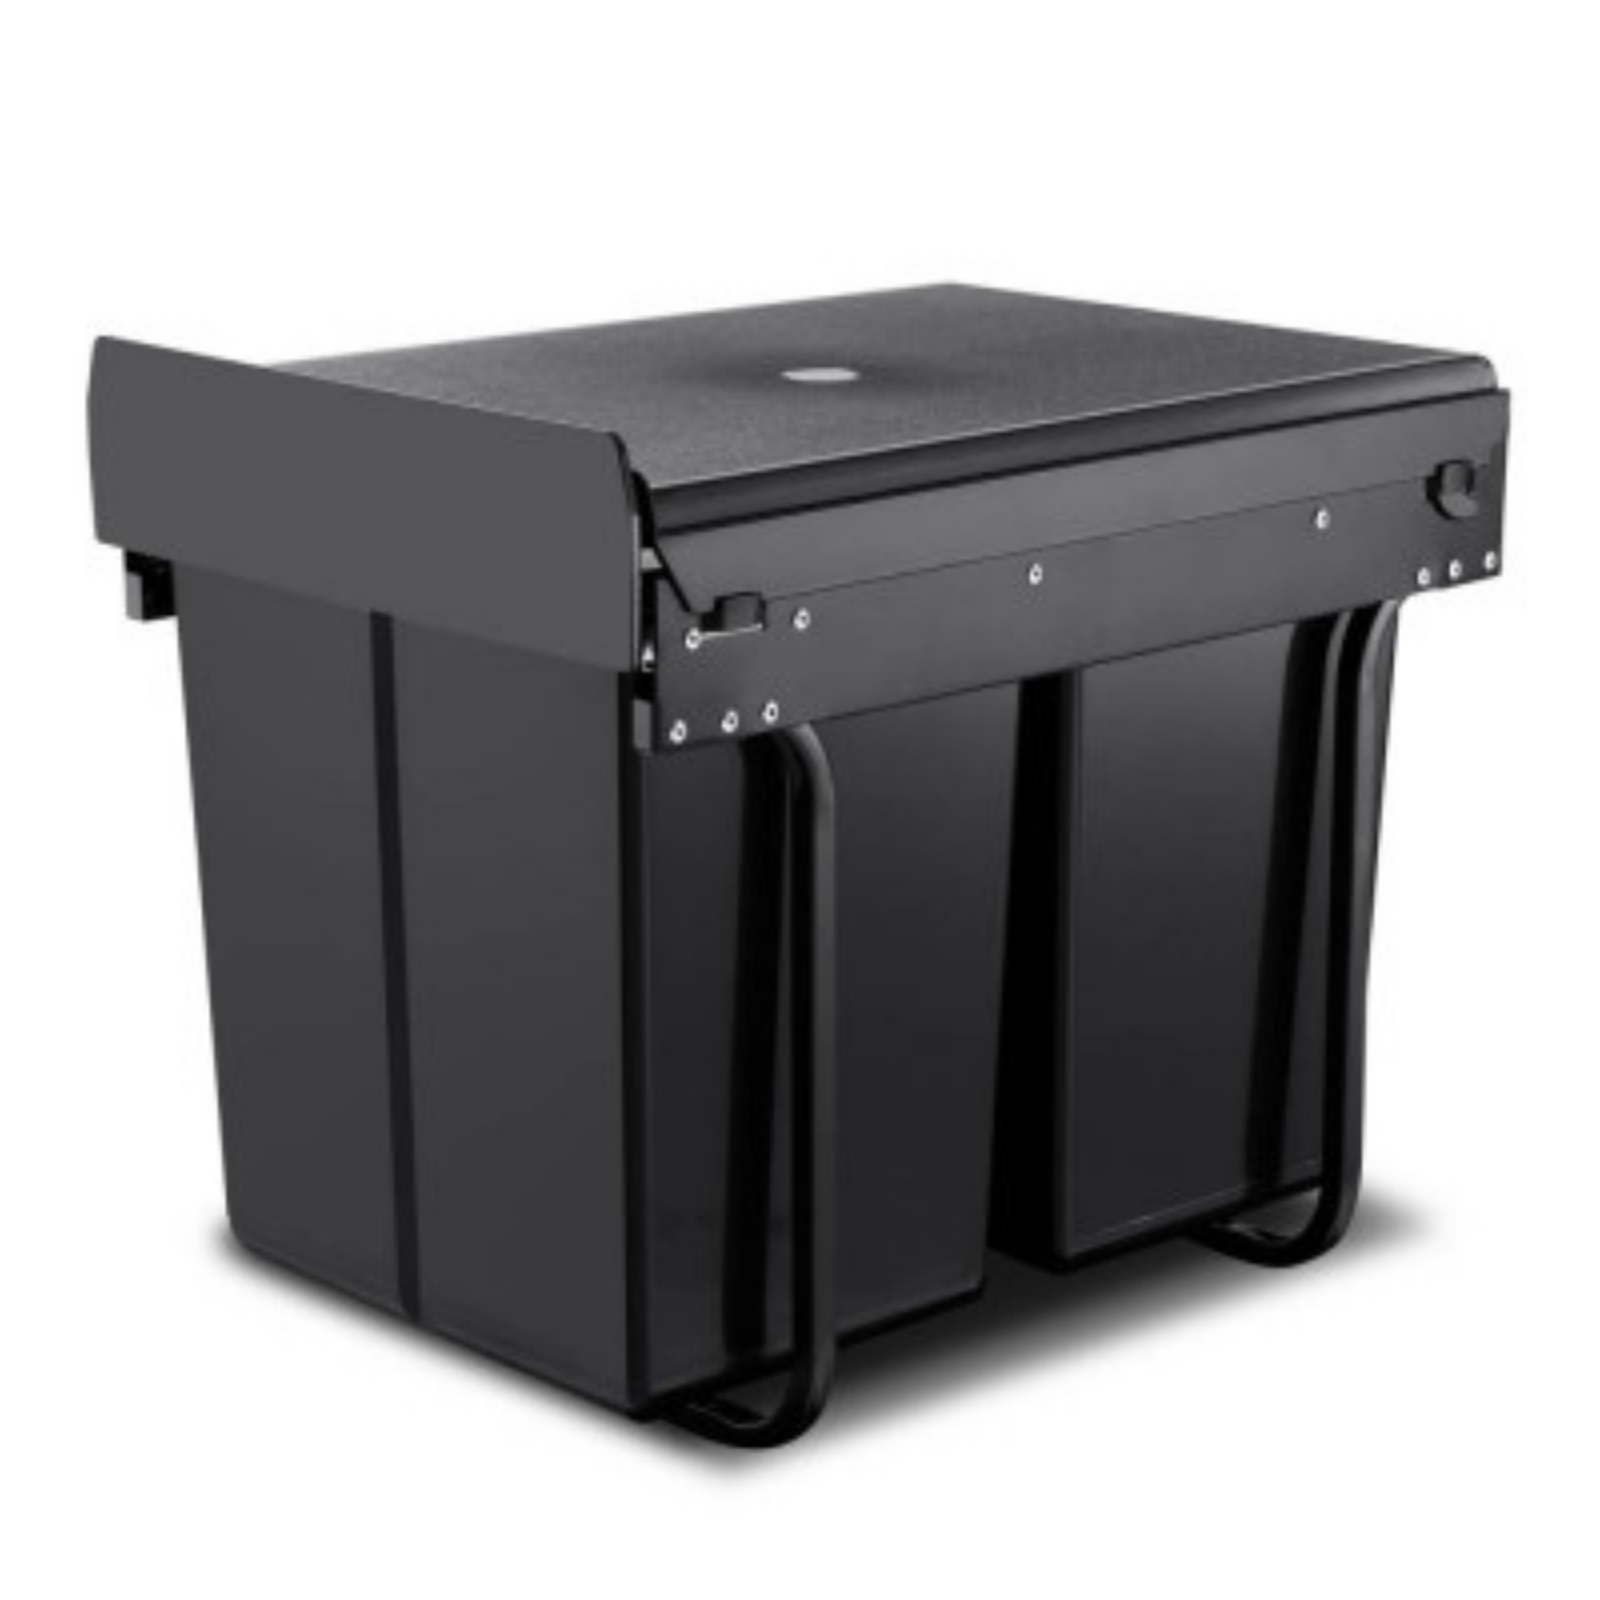 Cefito Dual Side Pull Out Bin's body & cover is made from ABS and Polypropylene plastic